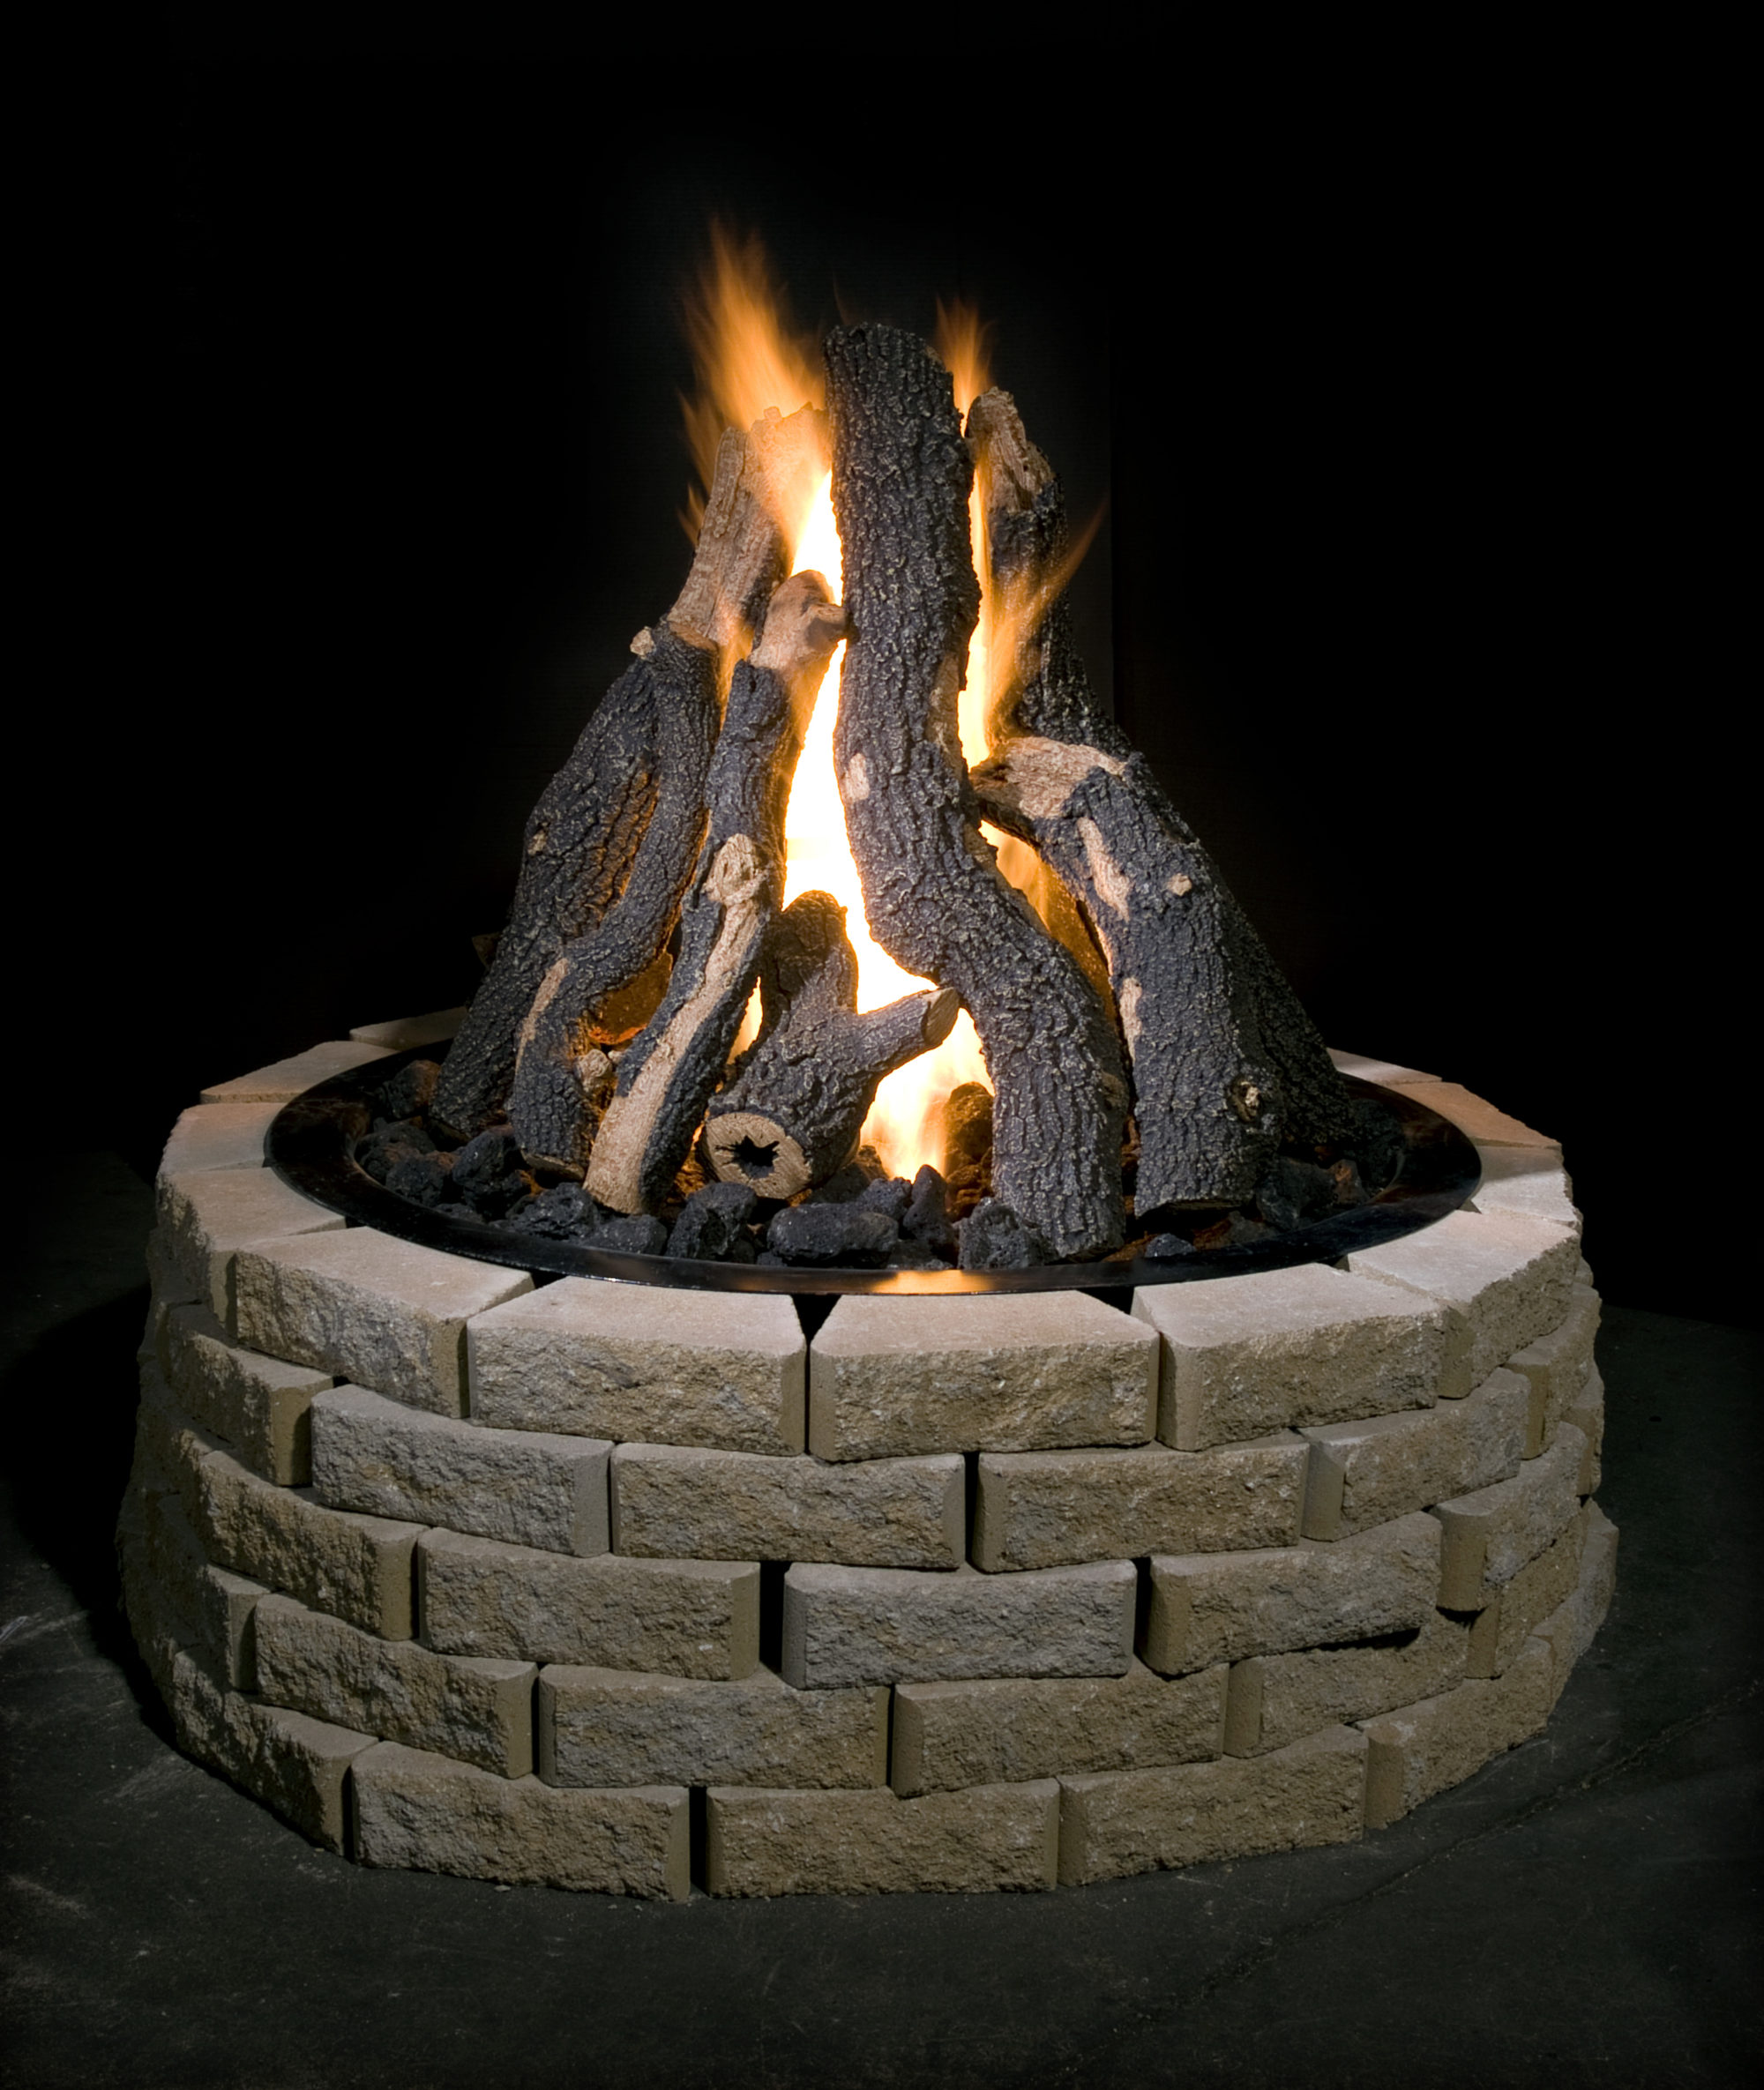 Outdoor Natural Gas Fire Pits Protech, Round 46 Hudson Stonetm Gas Fire Pit Kit